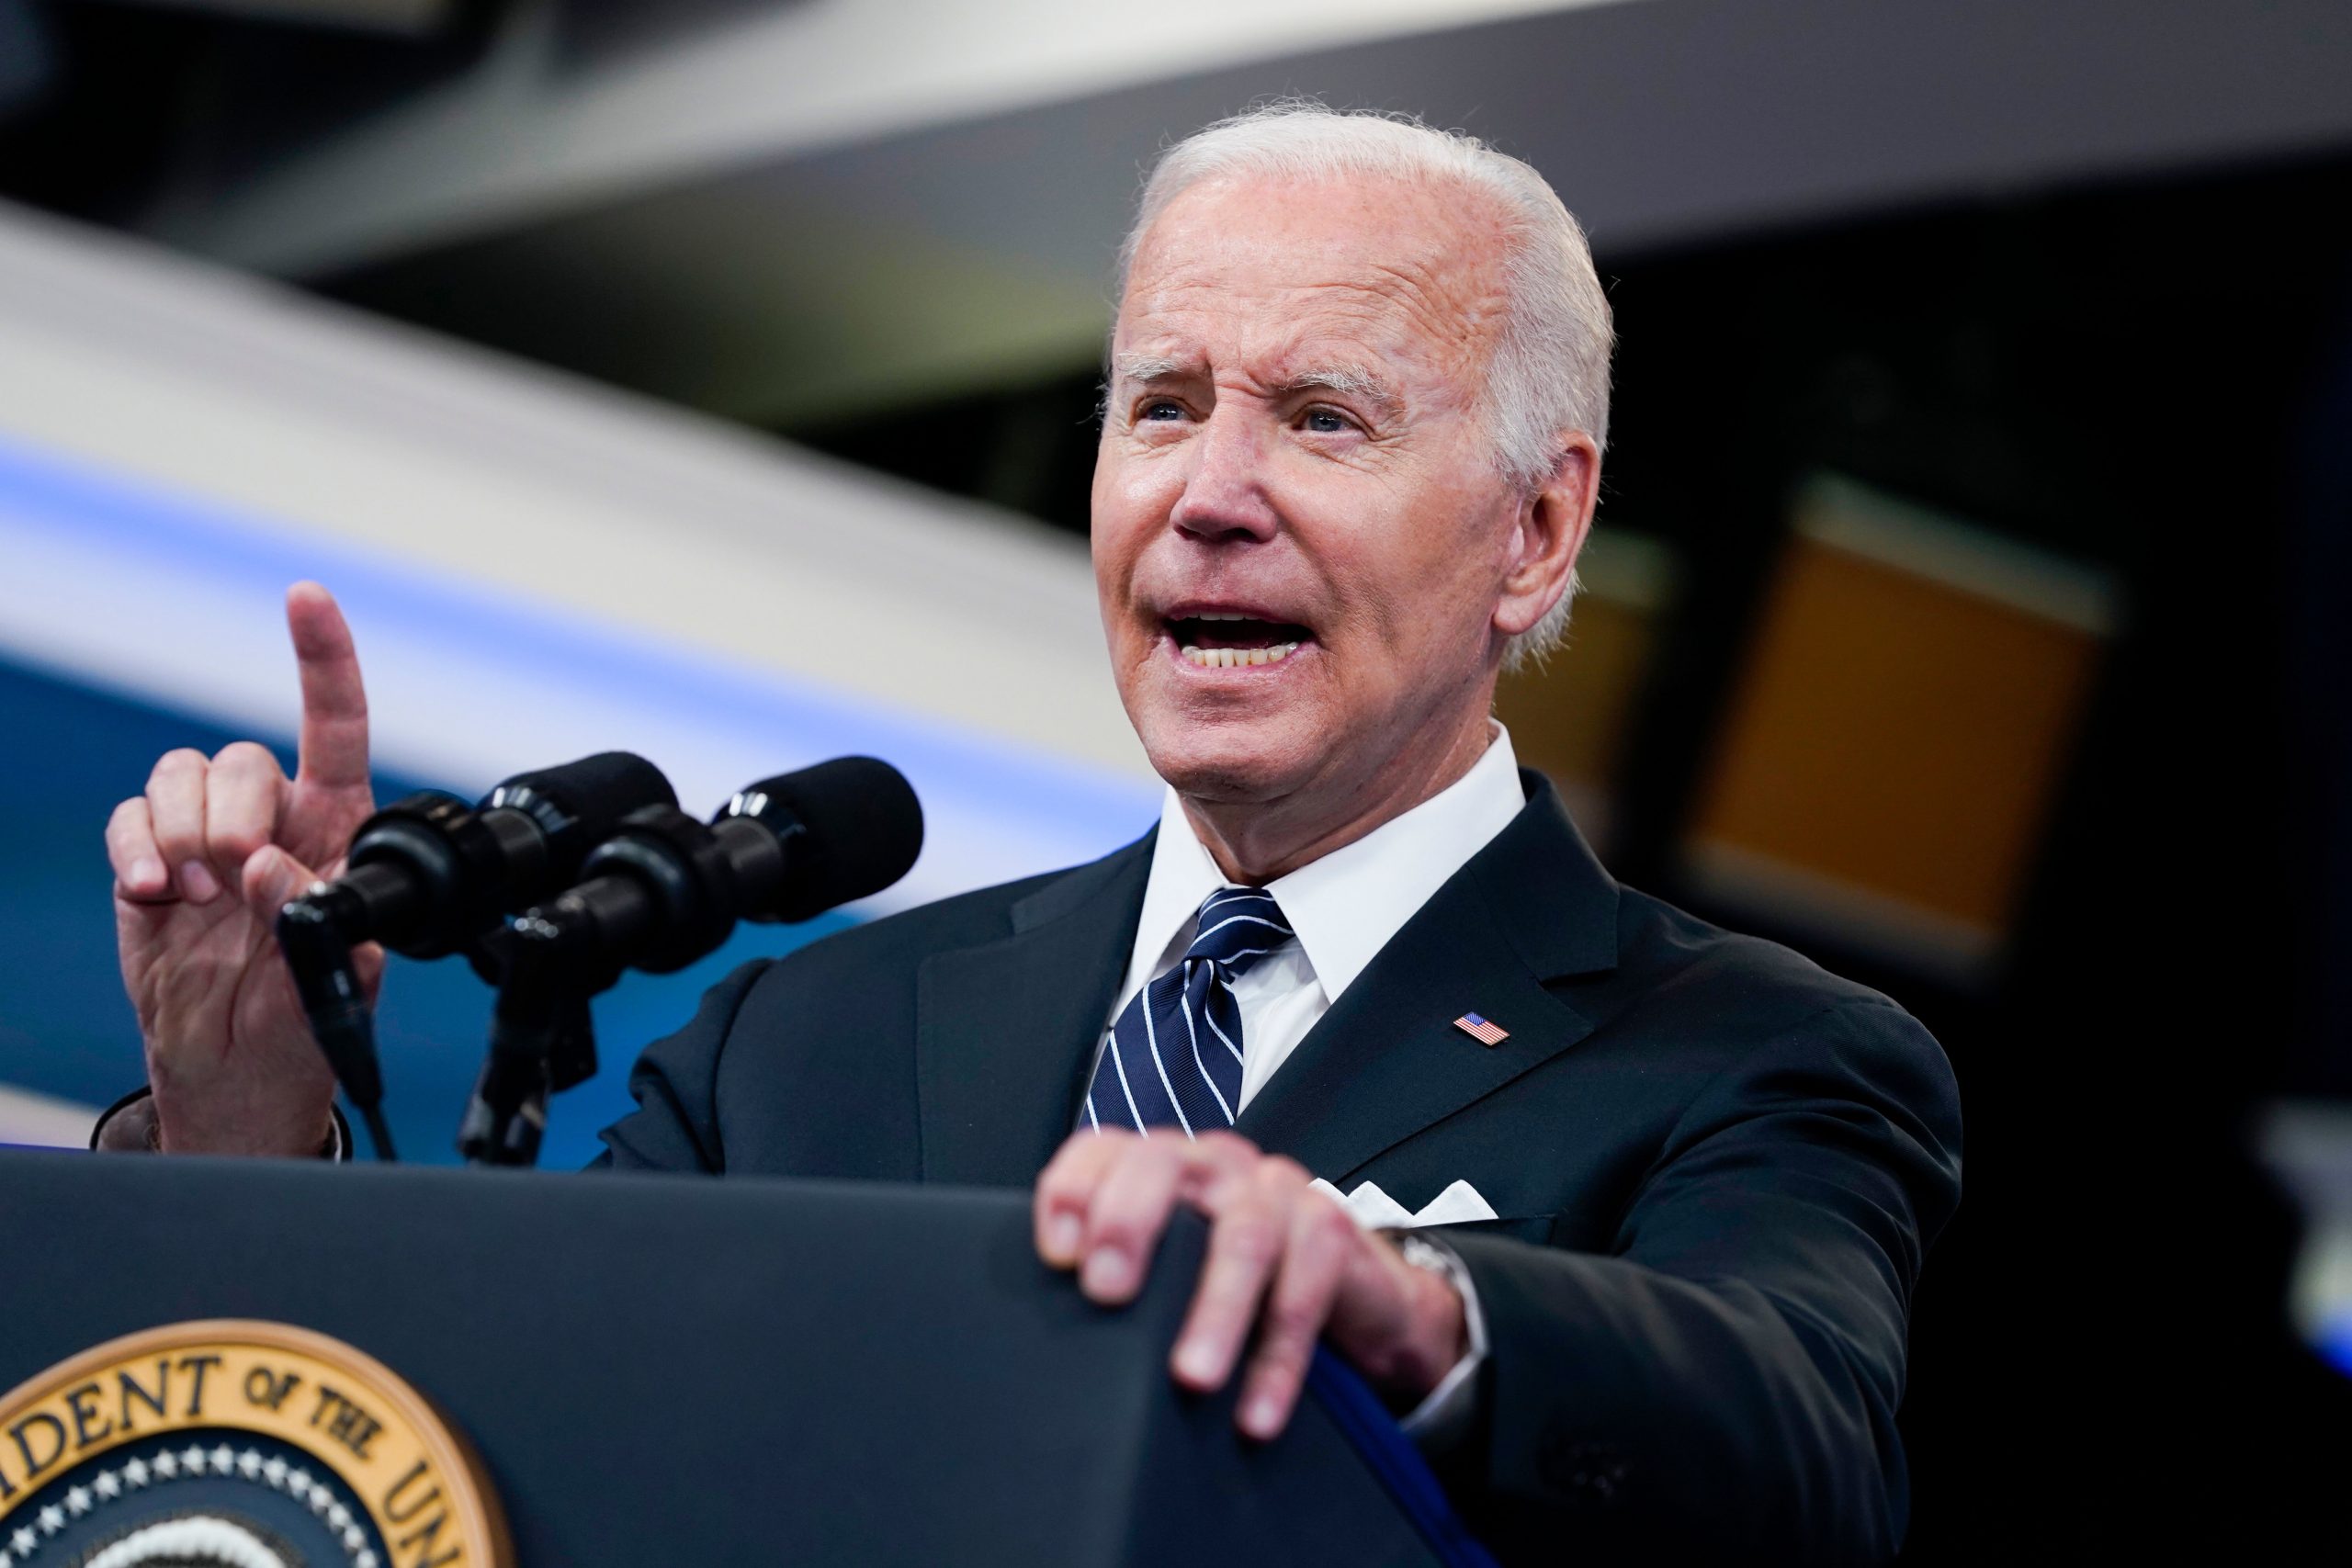 Will red states arrest women who travel for abortions? Joe Biden thinks so